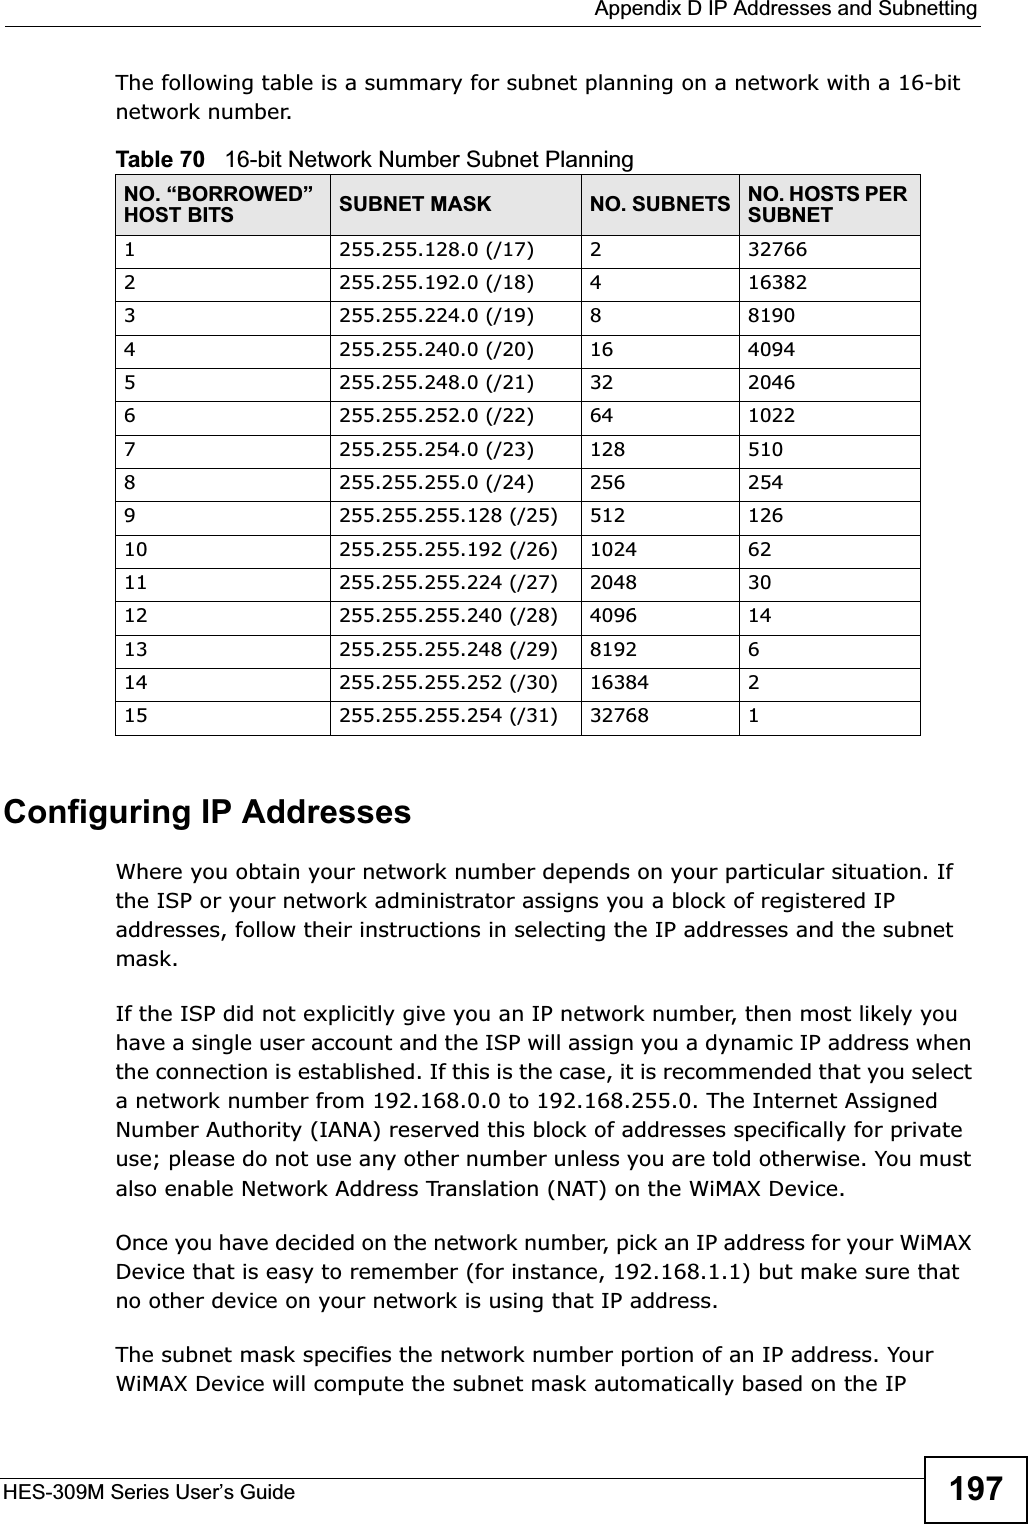  Appendix D IP Addresses and SubnettingHES-309M Series User’s Guide 197The following table is a summary for subnet planning on a network with a 16-bit network number. Configuring IP AddressesWhere you obtain your network number depends on your particular situation. If the ISP or your network administrator assigns you a block of registered IP addresses, follow their instructions in selecting the IP addresses and the subnet mask.If the ISP did not explicitly give you an IP network number, then most likely you have a single user account and the ISP will assign you a dynamic IP address when the connection is established. If this is the case, it is recommended that you select a network number from 192.168.0.0 to 192.168.255.0. The Internet Assigned Number Authority (IANA) reserved this block of addresses specifically for private use; please do not use any other number unless you are told otherwise. You must also enable Network Address Translation (NAT) on the WiMAX Device. Once you have decided on the network number, pick an IP address for your WiMAX Device that is easy to remember (for instance, 192.168.1.1) but make sure that no other device on your network is using that IP address.The subnet mask specifies the network number portion of an IP address. Your WiMAX Device will compute the subnet mask automatically based on the IP Table 70   16-bit Network Number Subnet PlanningNO. “BORROWED” HOST BITS SUBNET MASK NO. SUBNETS NO. HOSTS PER SUBNET1255.255.128.0 (/17) 2327662255.255.192.0 (/18) 4163823255.255.224.0 (/19) 881904255.255.240.0 (/20) 16 40945255.255.248.0 (/21) 32 20466255.255.252.0 (/22) 64 10227255.255.254.0 (/23) 128 5108255.255.255.0 (/24) 256 2549255.255.255.128 (/25) 512 12610 255.255.255.192 (/26) 1024 6211 255.255.255.224 (/27) 2048 3012 255.255.255.240 (/28) 4096 1413 255.255.255.248 (/29) 8192 614 255.255.255.252 (/30) 16384 215 255.255.255.254 (/31) 32768 1